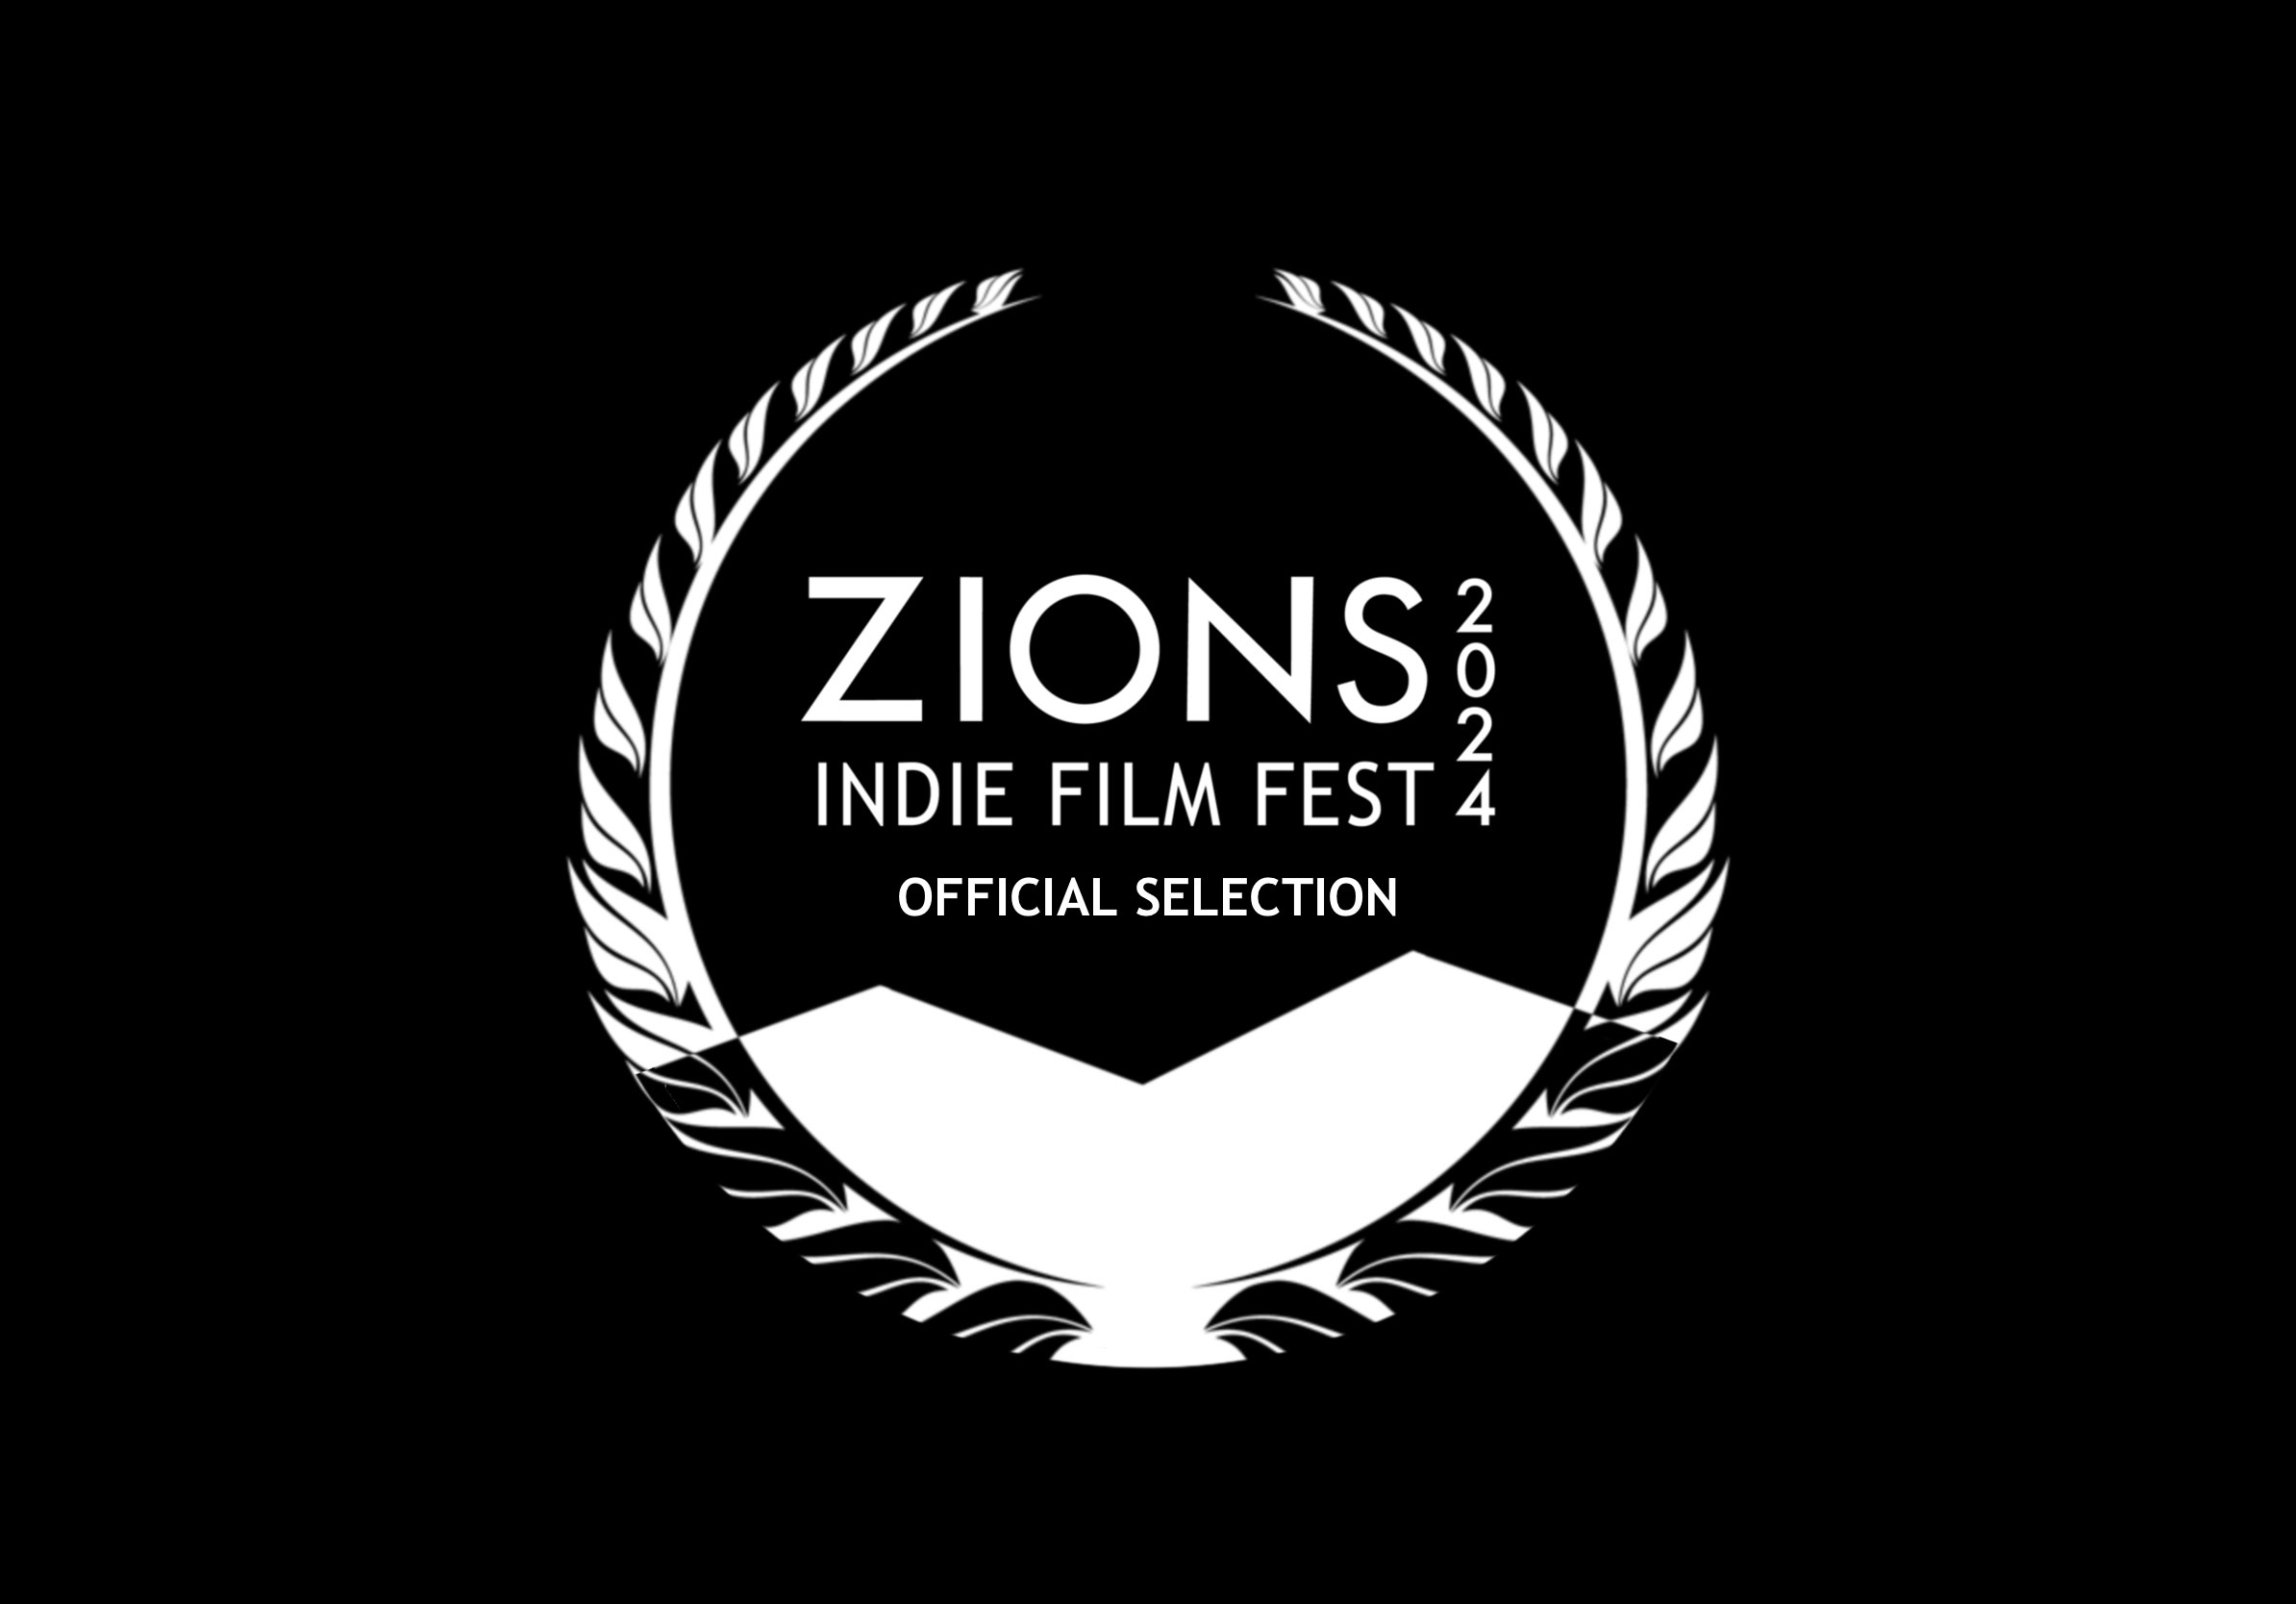 I Be a Witch Officially Selected by the Zions Indie Film Fest